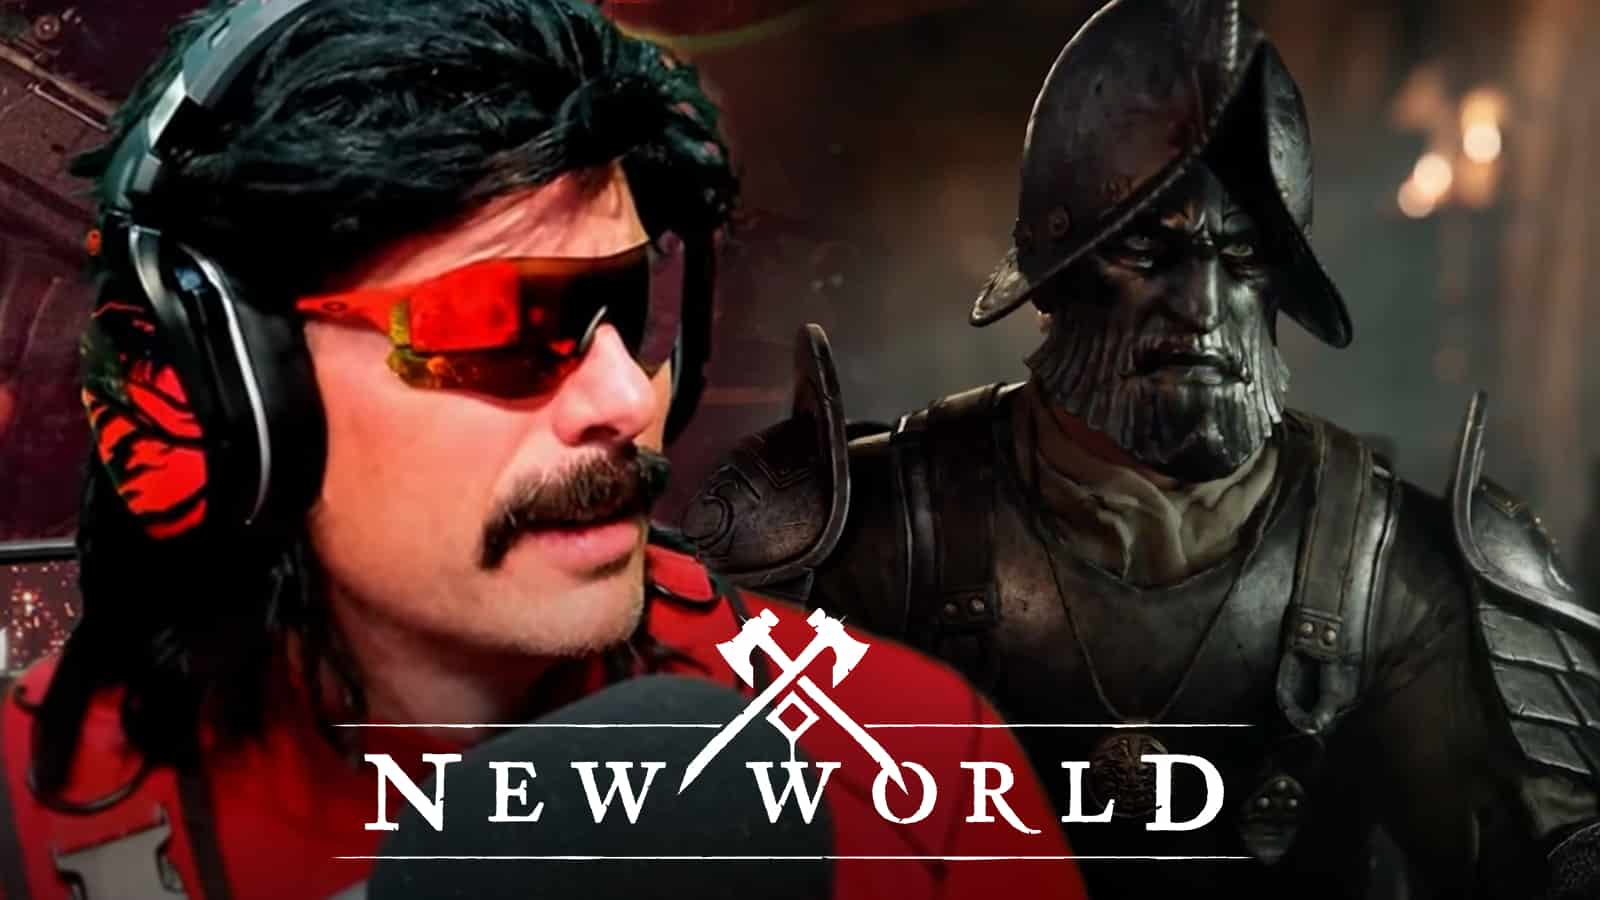 Dr Disrespect stares at New World during YouTube stream.